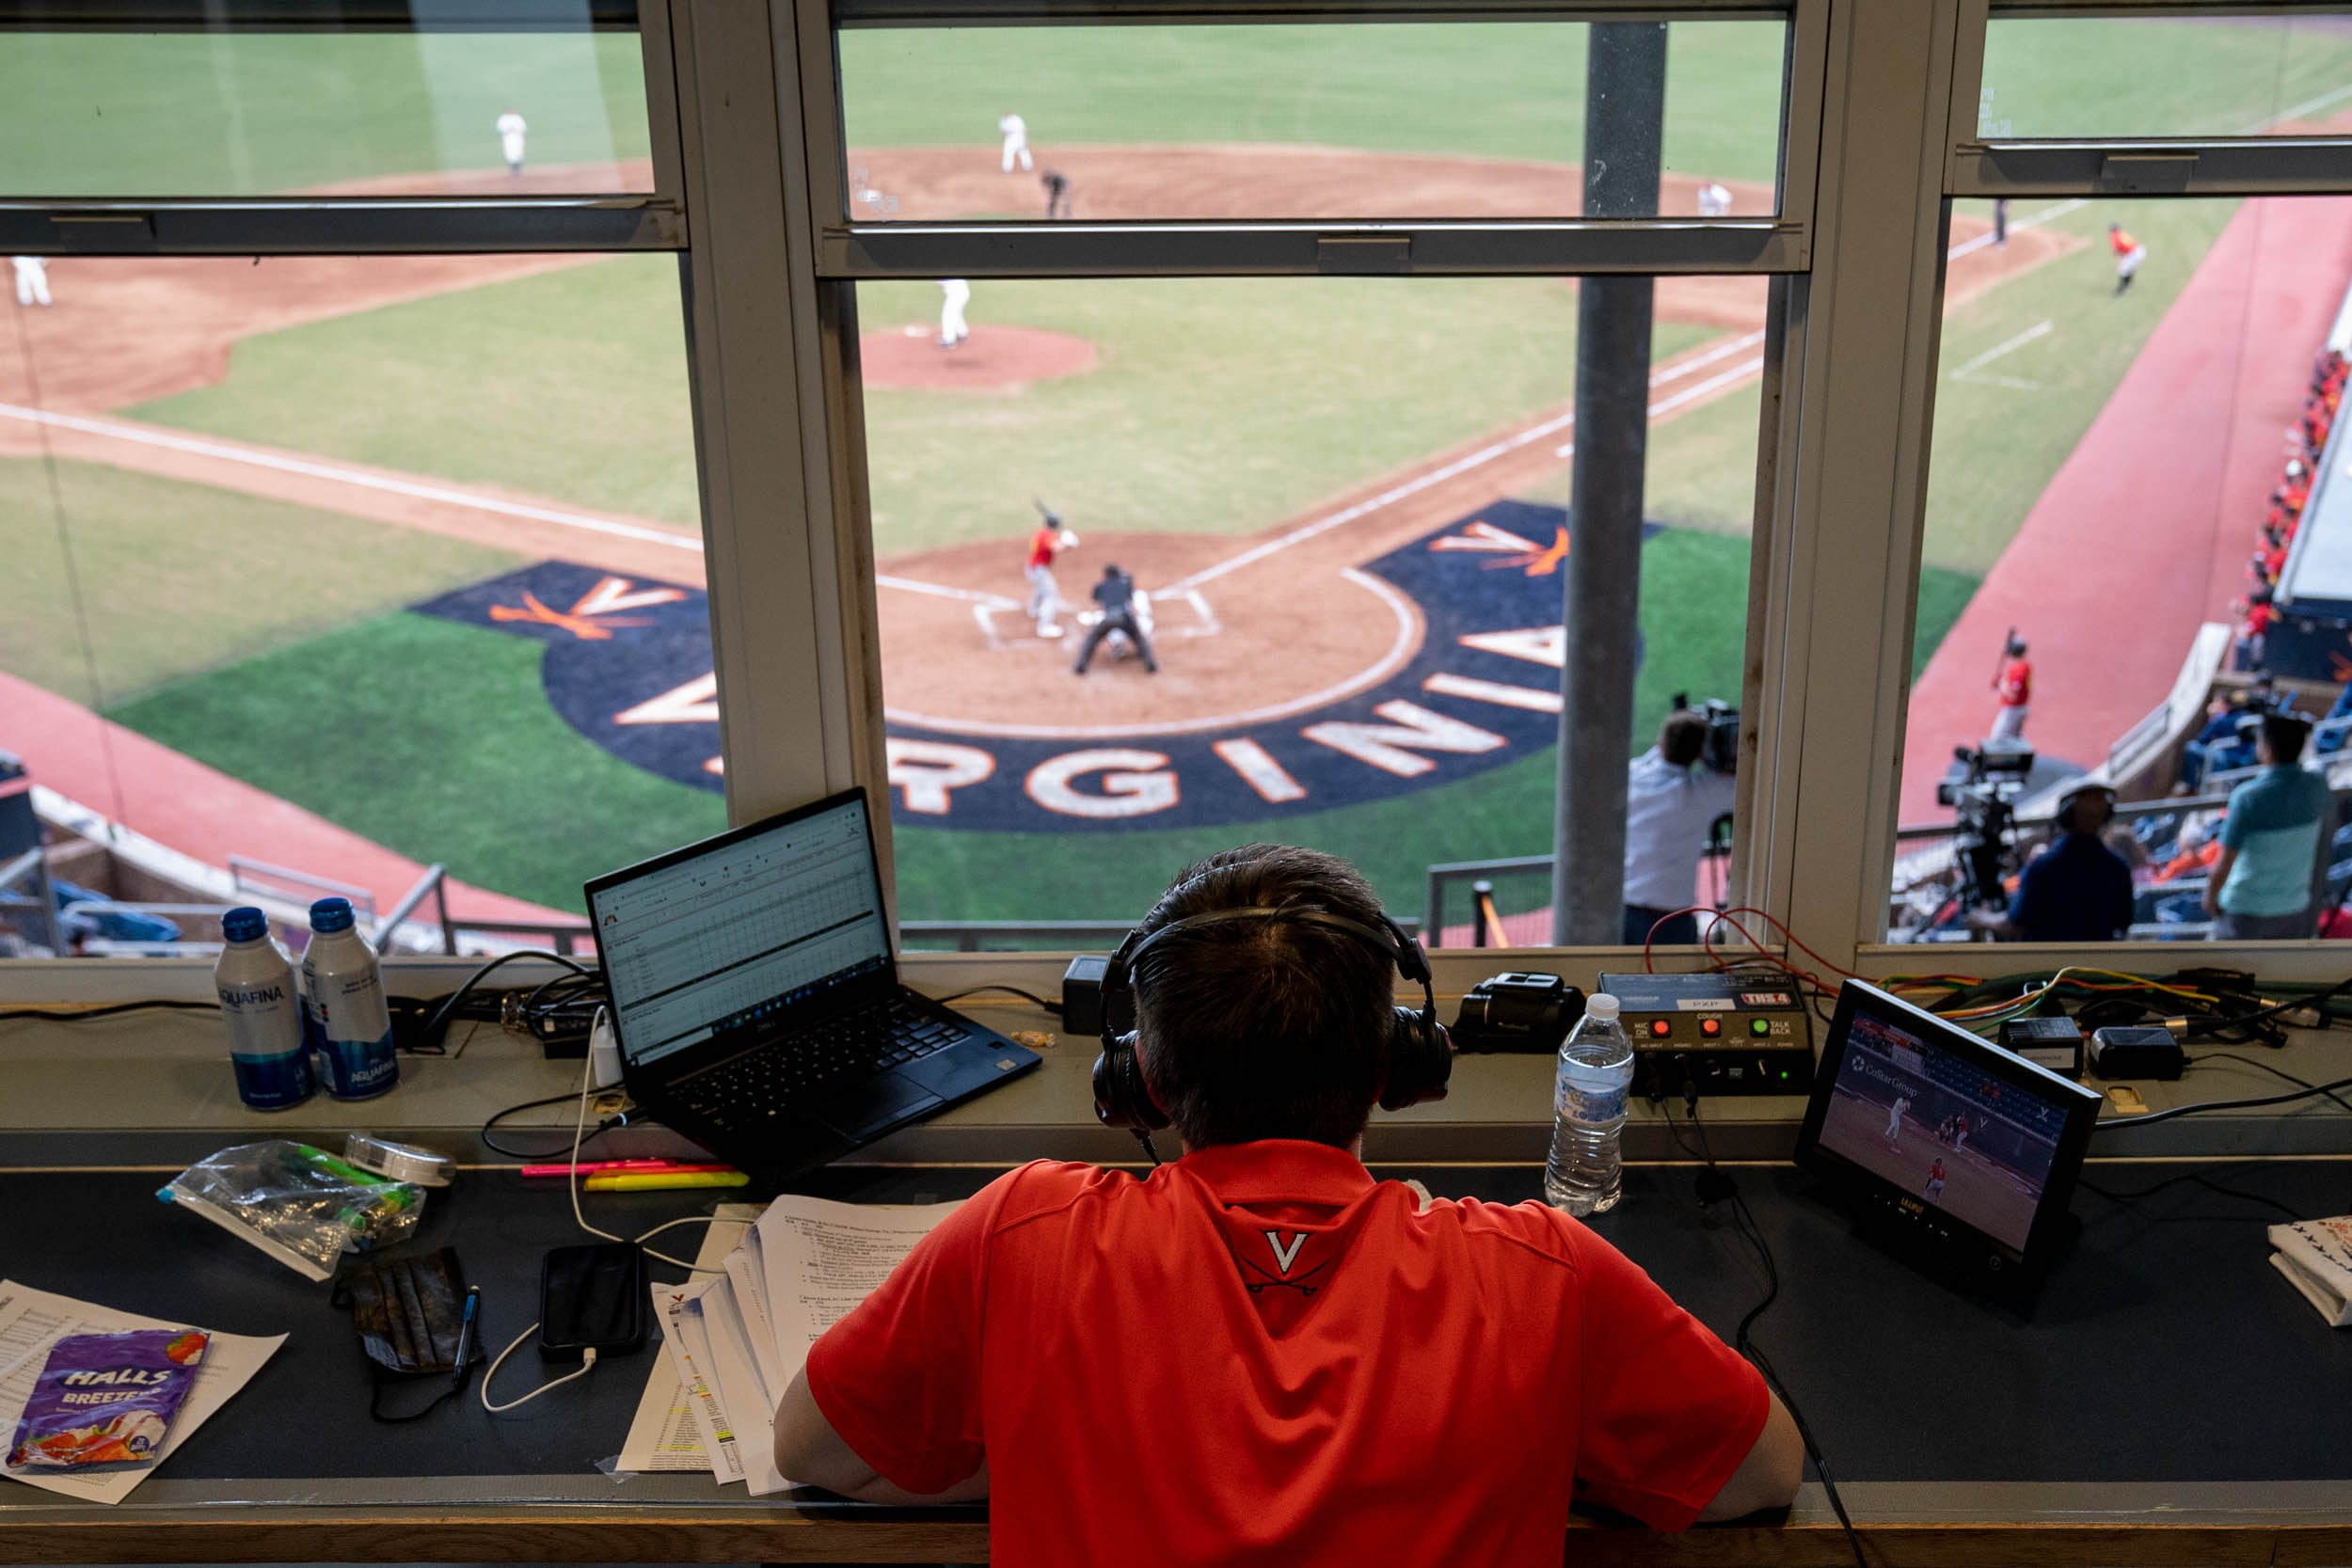 Announcer sitting at a desk behind home plate watching a baseball game